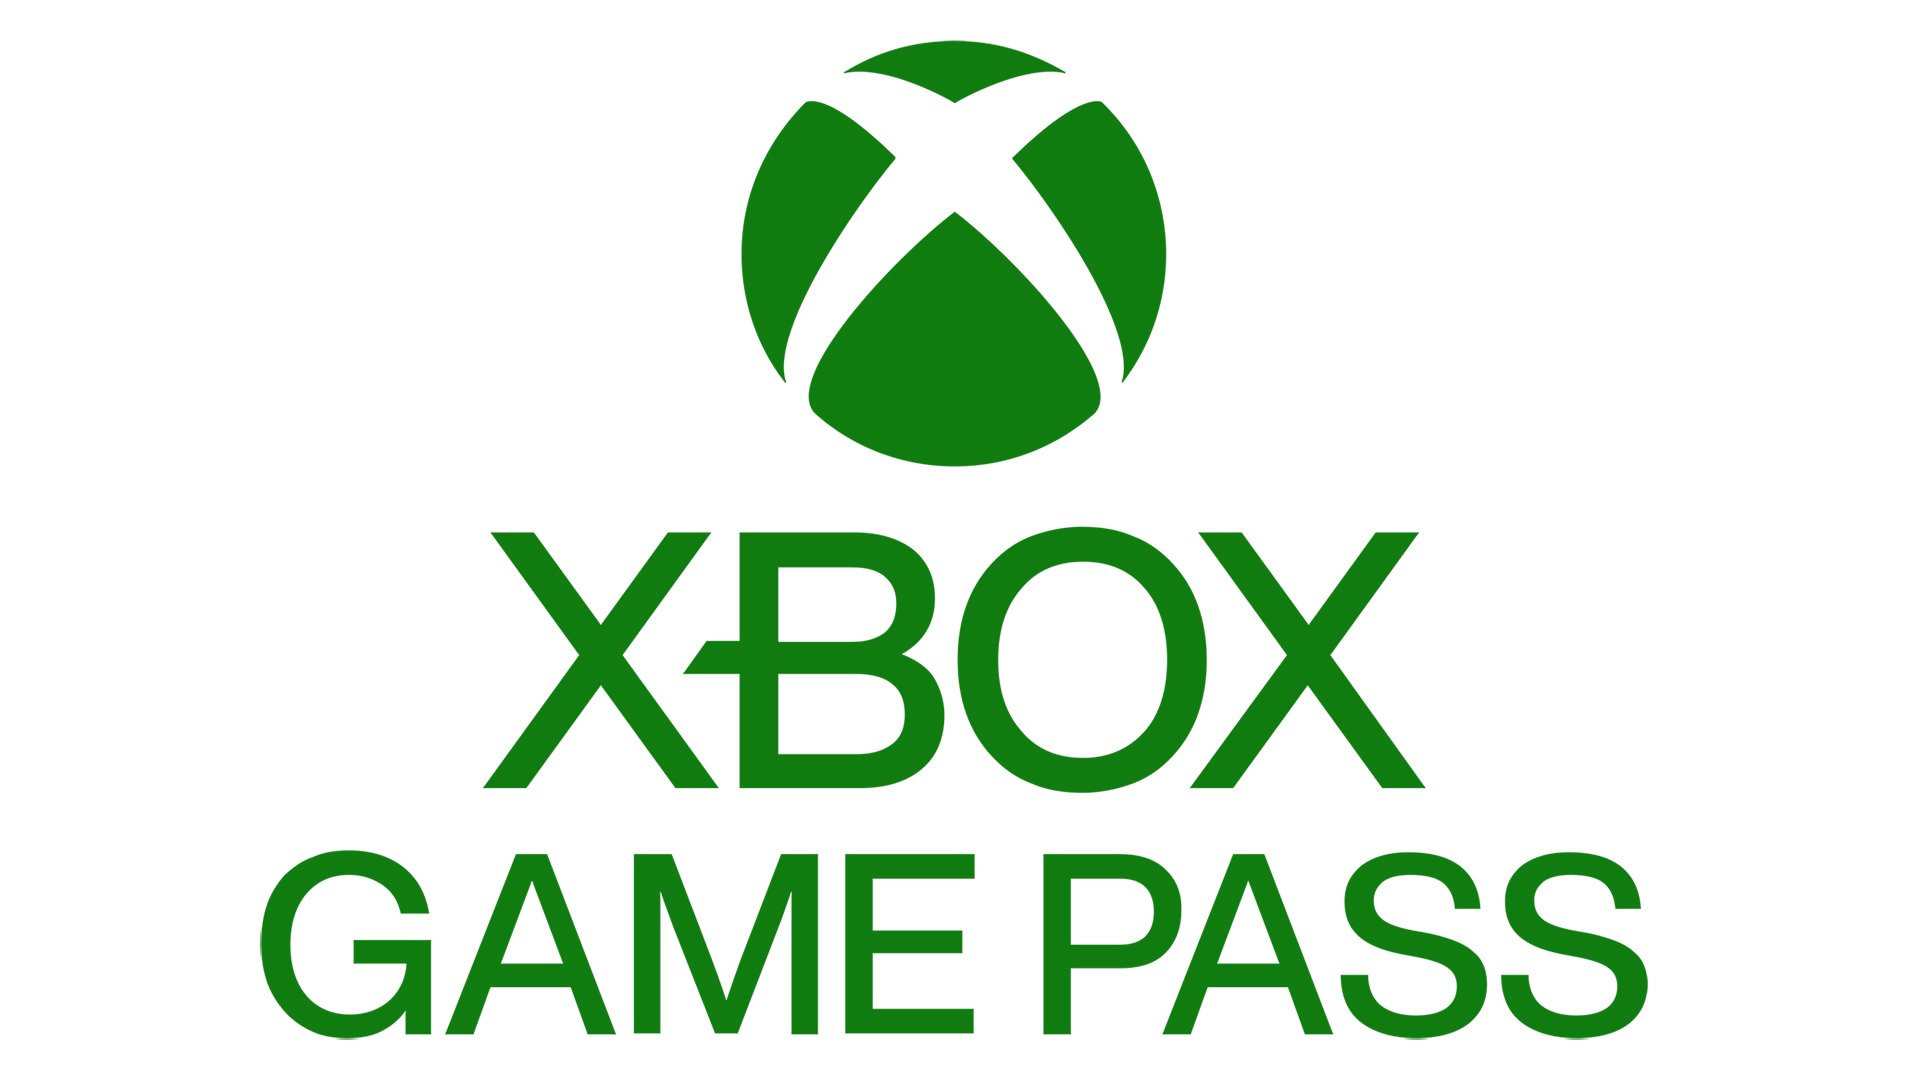 Samsung partners with Microsoft to offer Xbox Game Pass, Wireless